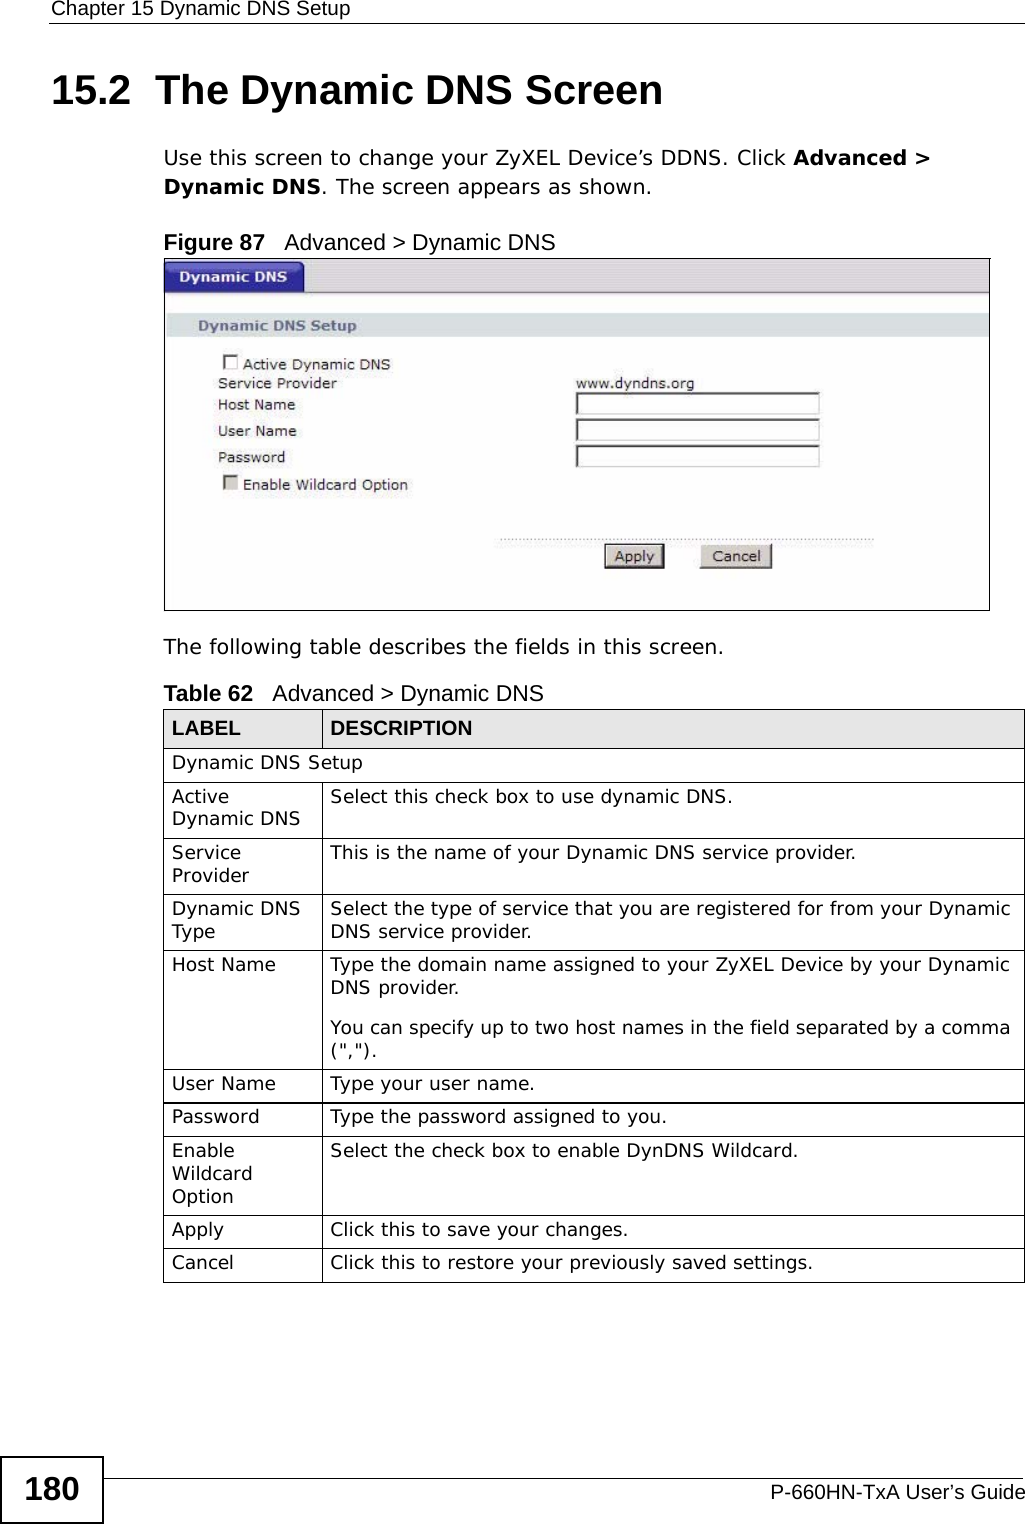 Chapter 15 Dynamic DNS SetupP-660HN-TxA User’s Guide18015.2  The Dynamic DNS ScreenUse this screen to change your ZyXEL Device’s DDNS. Click Advanced &gt; Dynamic DNS. The screen appears as shown.Figure 87   Advanced &gt; Dynamic DNSThe following table describes the fields in this screen. Table 62   Advanced &gt; Dynamic DNSLABEL DESCRIPTIONDynamic DNS SetupActive Dynamic DNS Select this check box to use dynamic DNS.Service Provider This is the name of your Dynamic DNS service provider.Dynamic DNS Type Select the type of service that you are registered for from your Dynamic DNS service provider.Host Name Type the domain name assigned to your ZyXEL Device by your Dynamic DNS provider.You can specify up to two host names in the field separated by a comma (&quot;,&quot;).User Name Type your user name.Password Type the password assigned to you.Enable Wildcard OptionSelect the check box to enable DynDNS Wildcard.Apply Click this to save your changes.Cancel Click this to restore your previously saved settings.